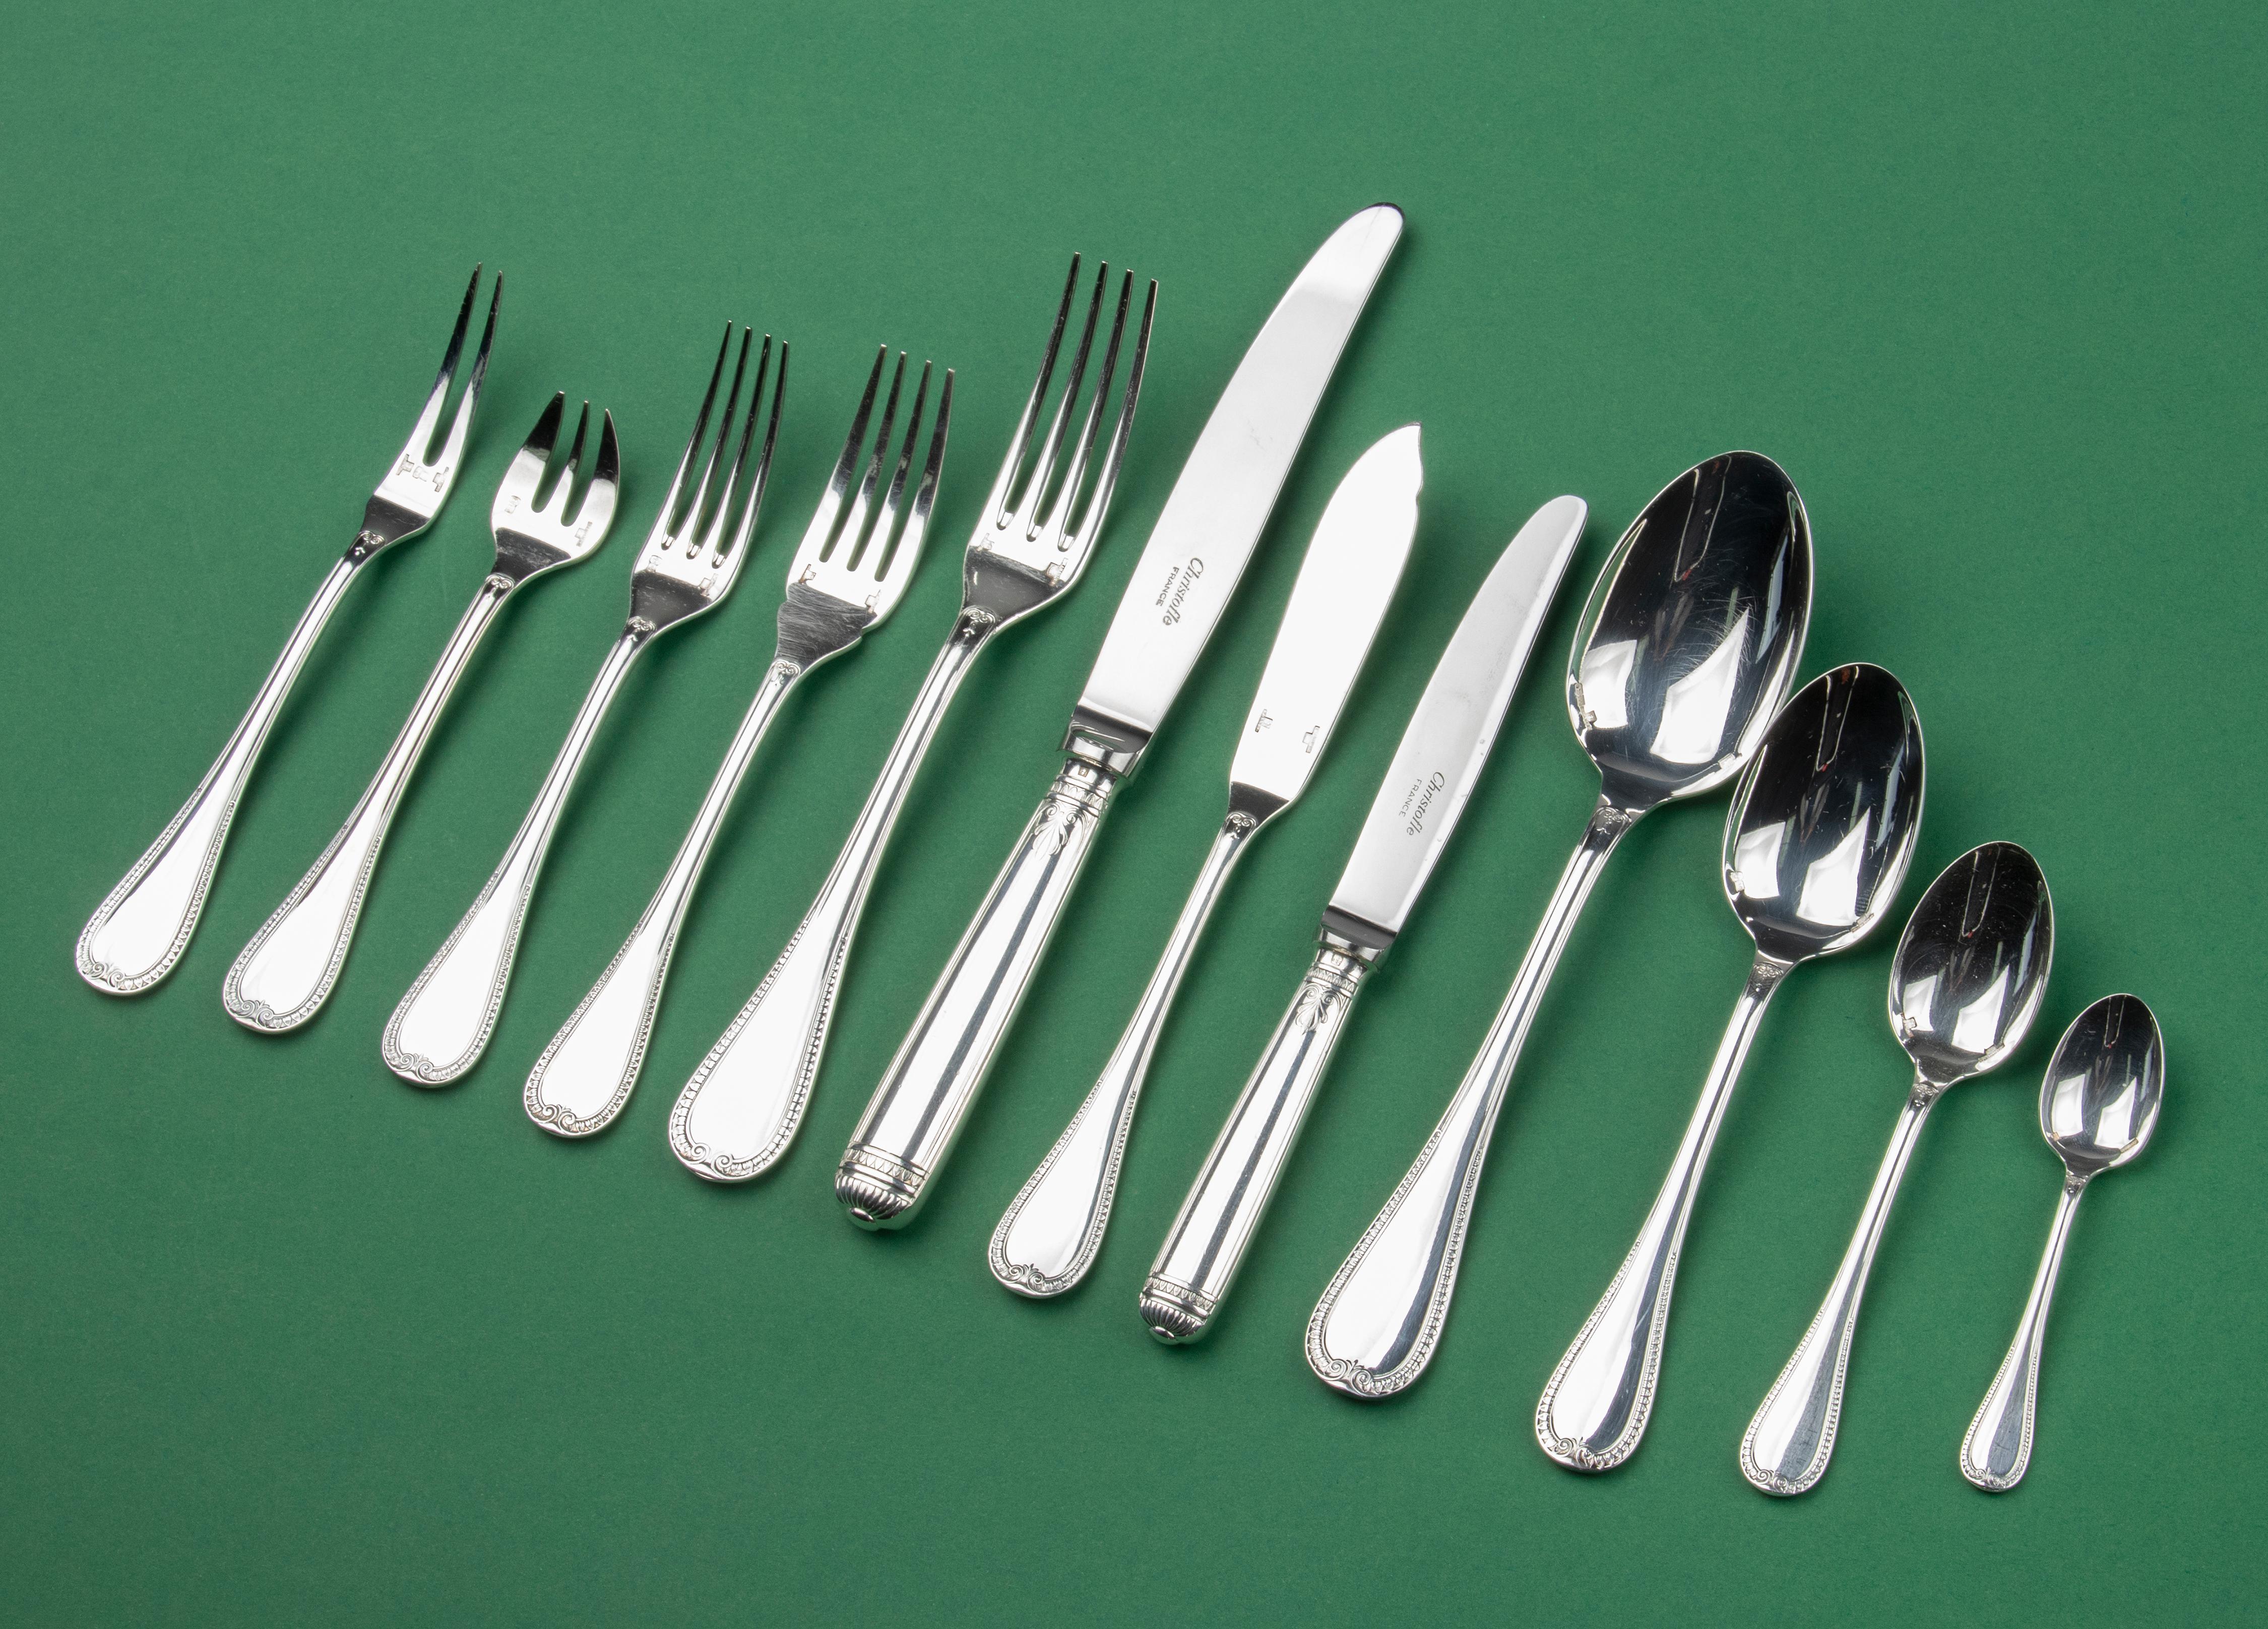 Beautiful silver plated cutlery, 130 pieces in total, from the French brand Christofle. The model's name is Malmaison. A classic and timeless design that suits any table setting. The cutlery comes in an original Christofle cassette, the composition